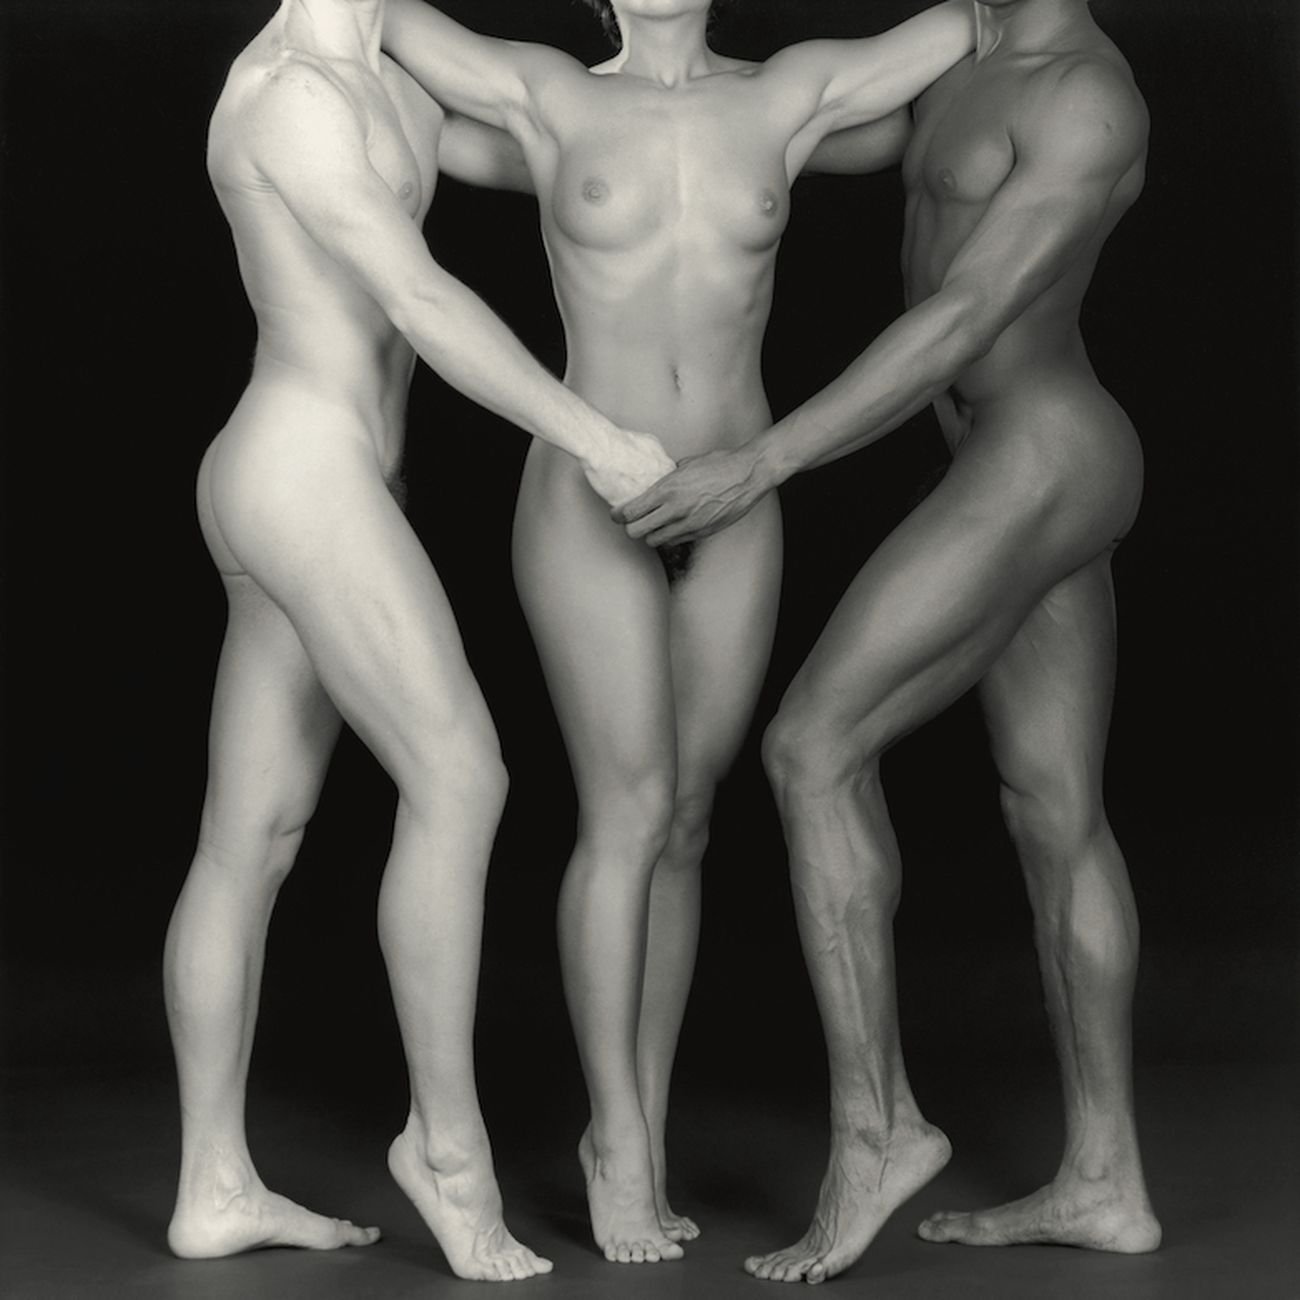 Robert Mapplethorpe, Ken and Lydia and Tyler, 1985 © Robert Mapplethorpe Foundation. Used by permission